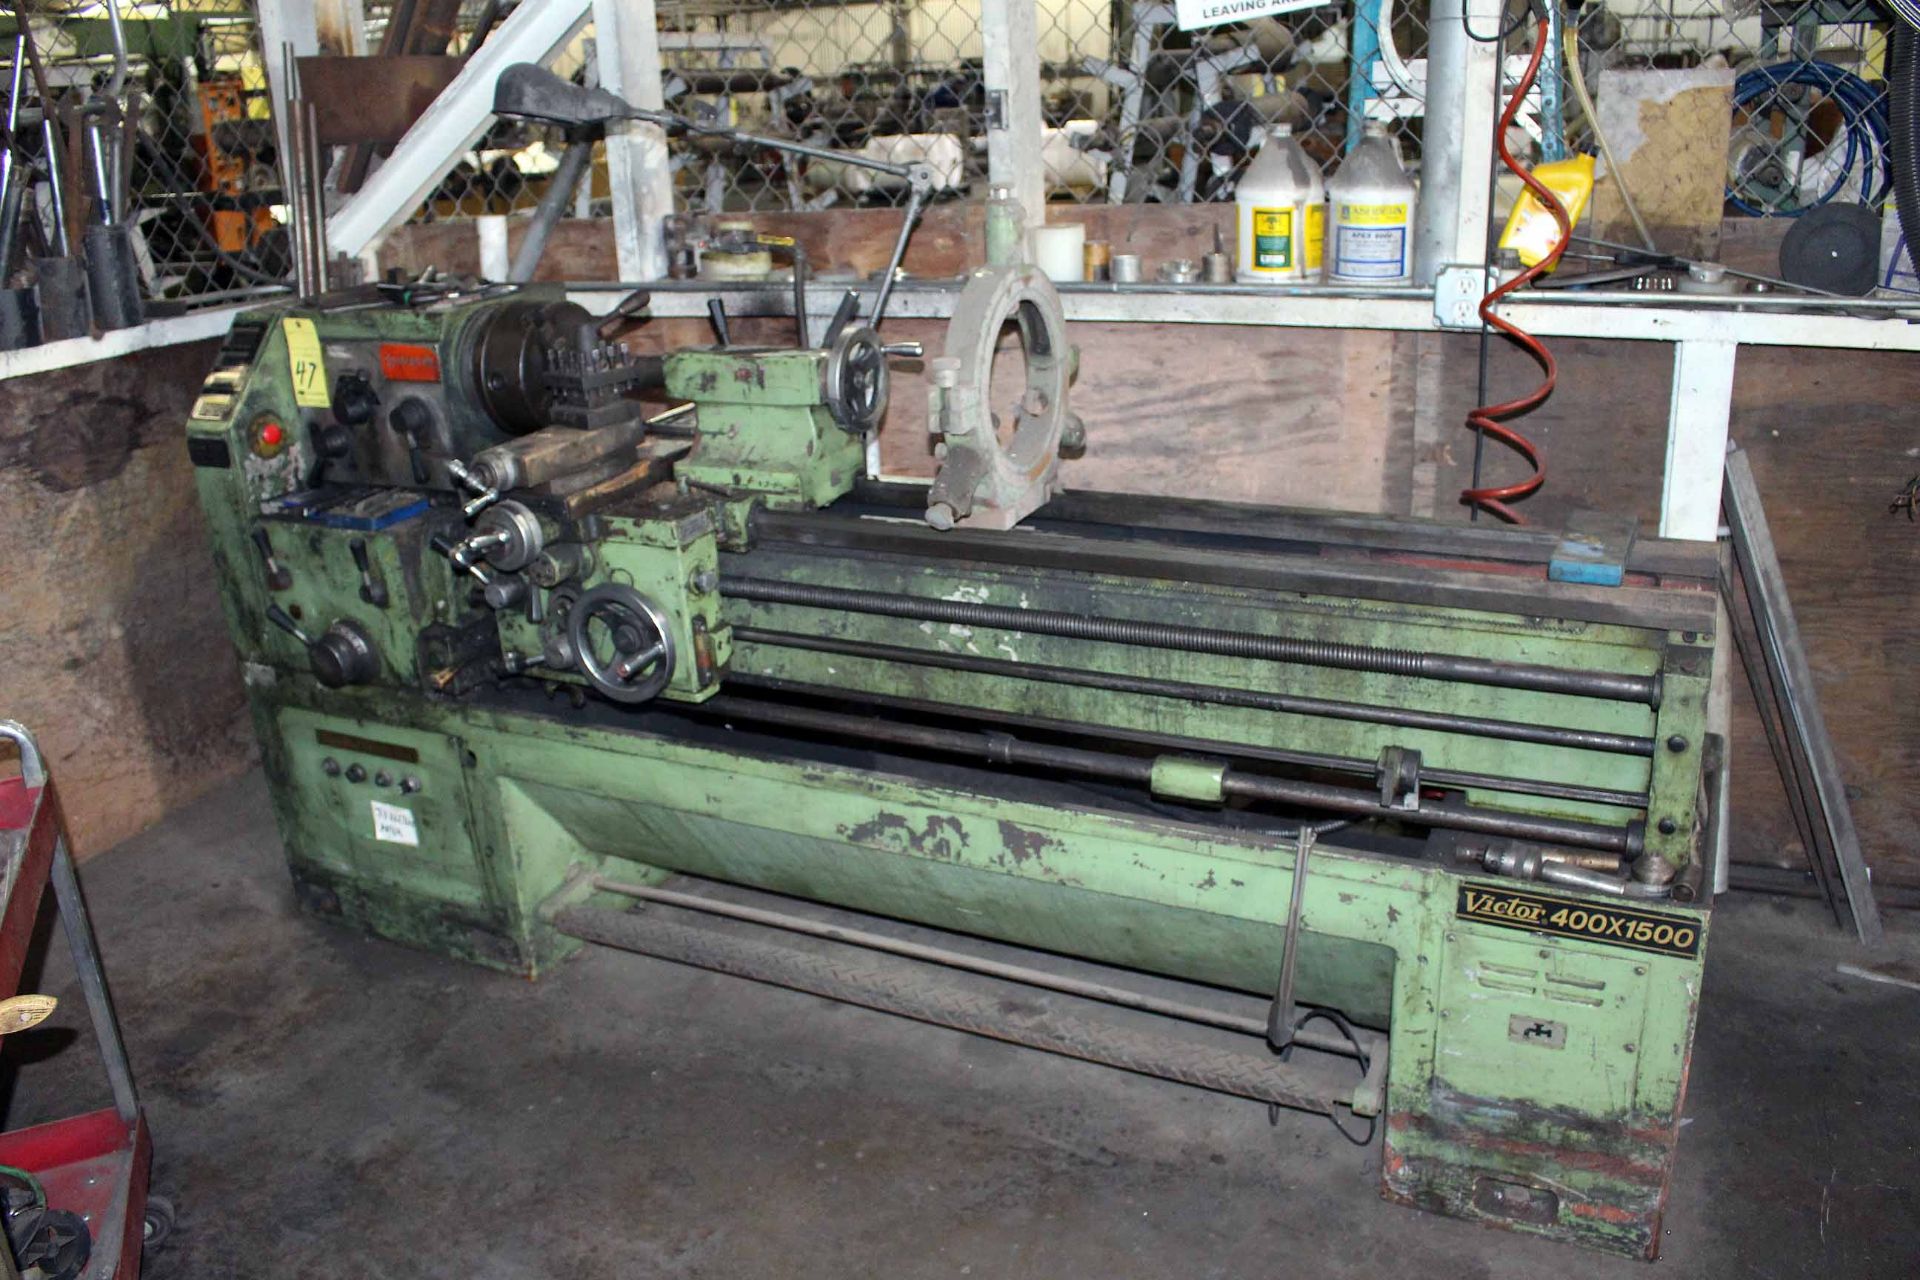 ENGINE LATHE, VICTOR 14 X 60, spds: 120-1200 RPM, 9" dia. 3-jaw chuck, thdng., no taper